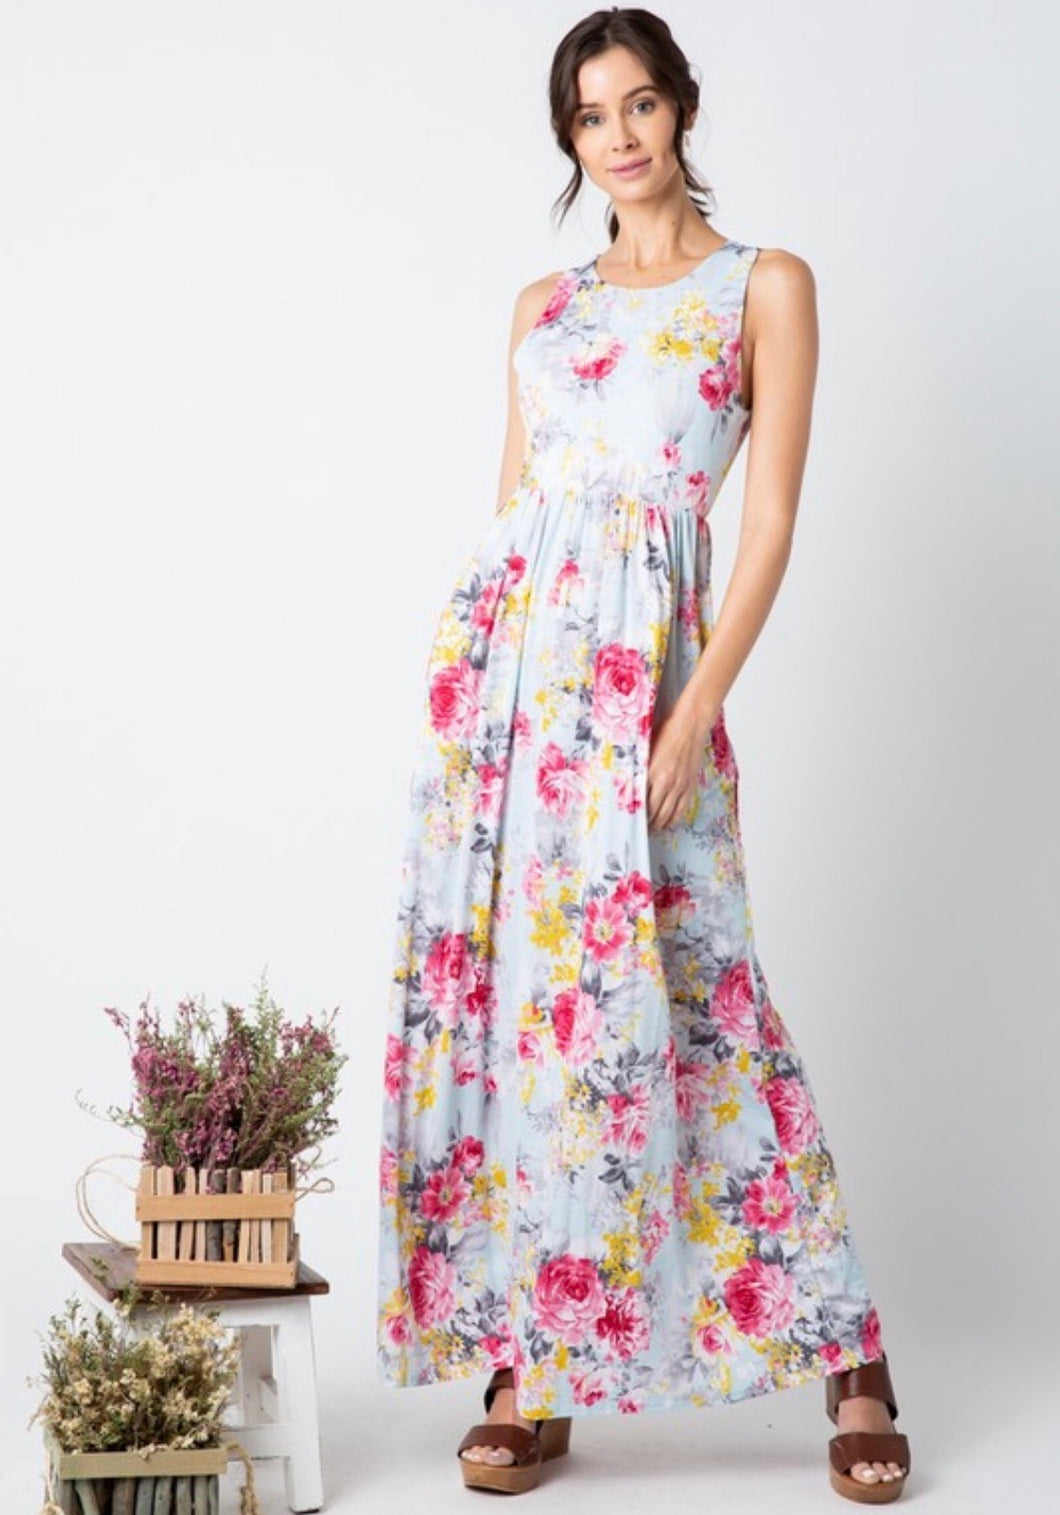 pale mint and floral print pattern long maxi dress with sleeveless top. cinched at small of wasit and has pockets